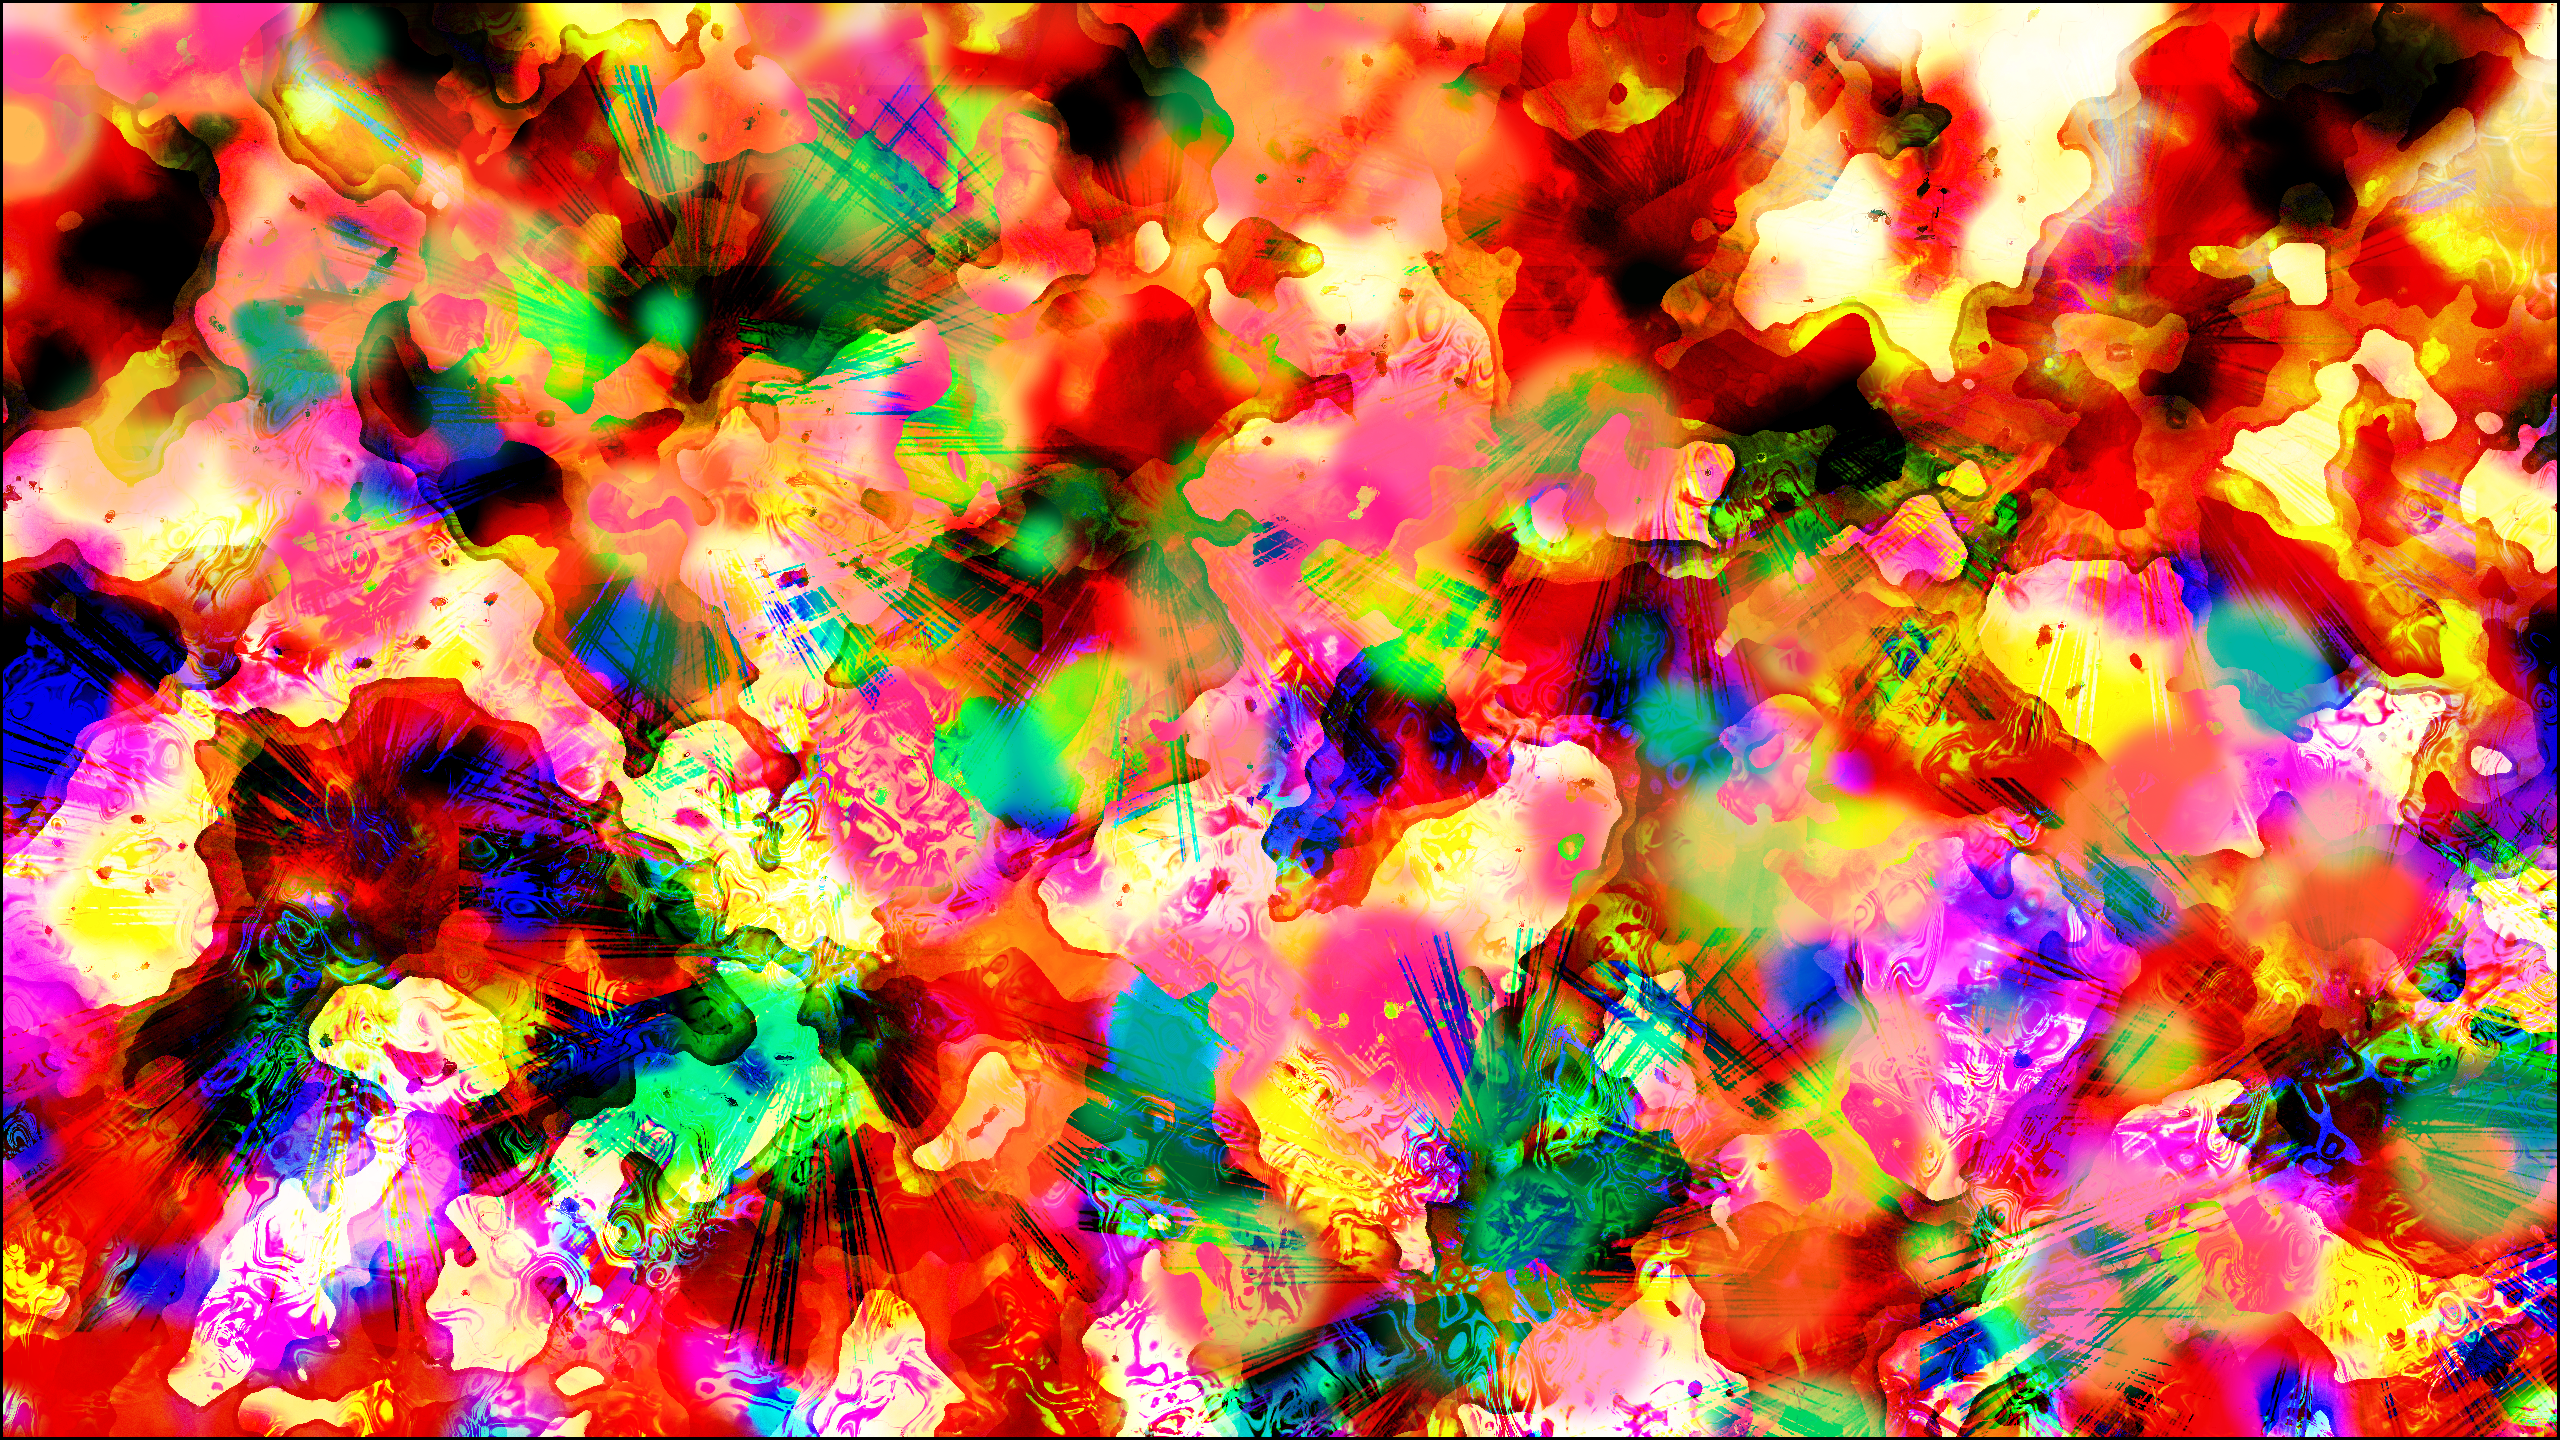 Abstract Trippy Brightness Melted 2560x1440